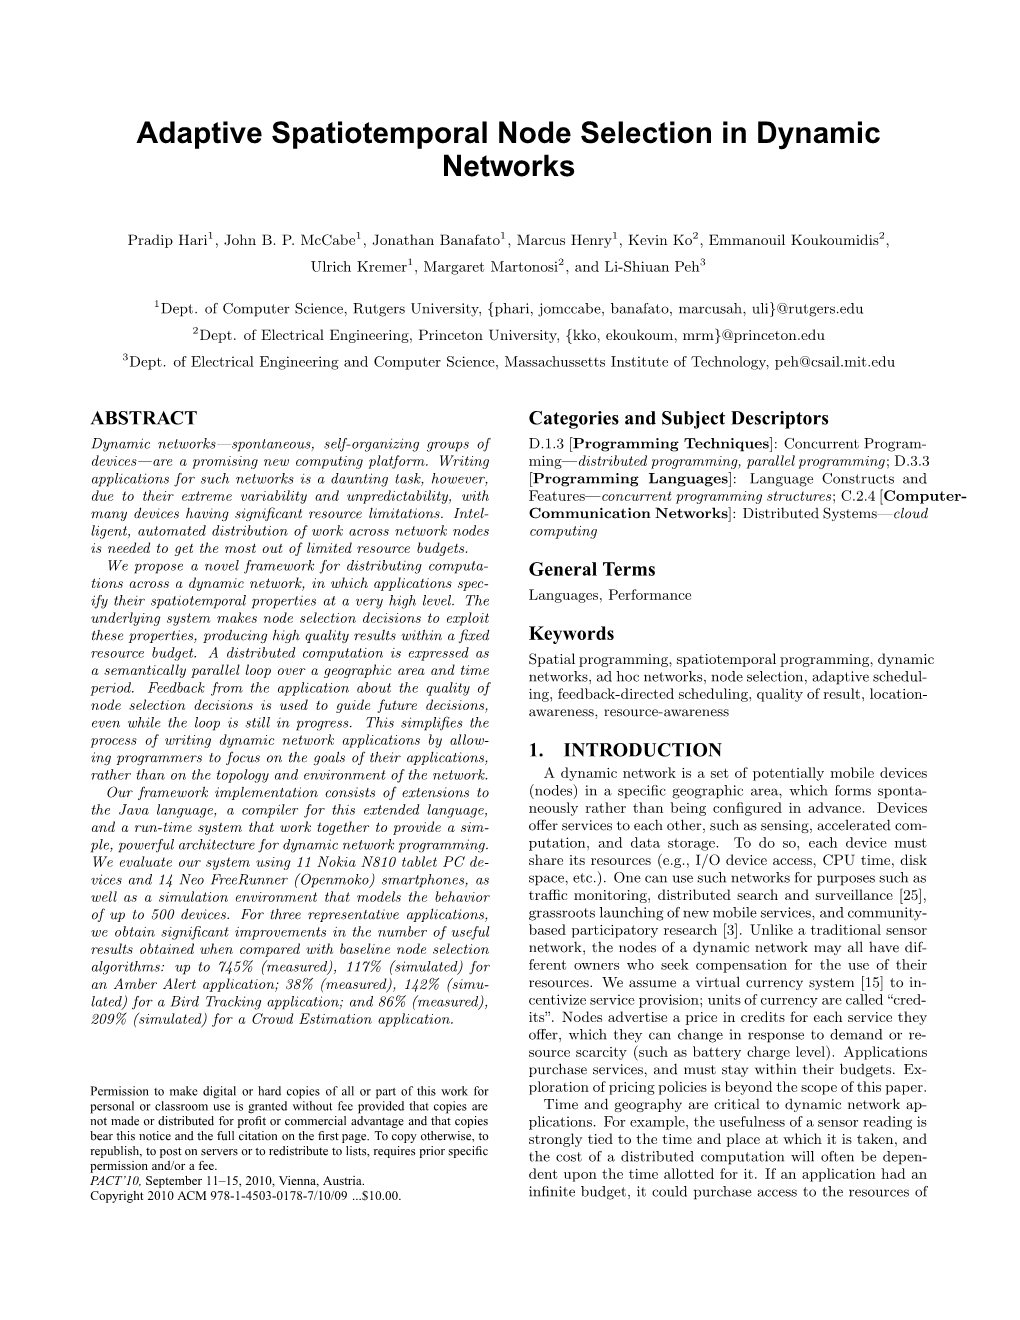 Adaptive Spatiotemporal Node Selection in Dynamic Networks